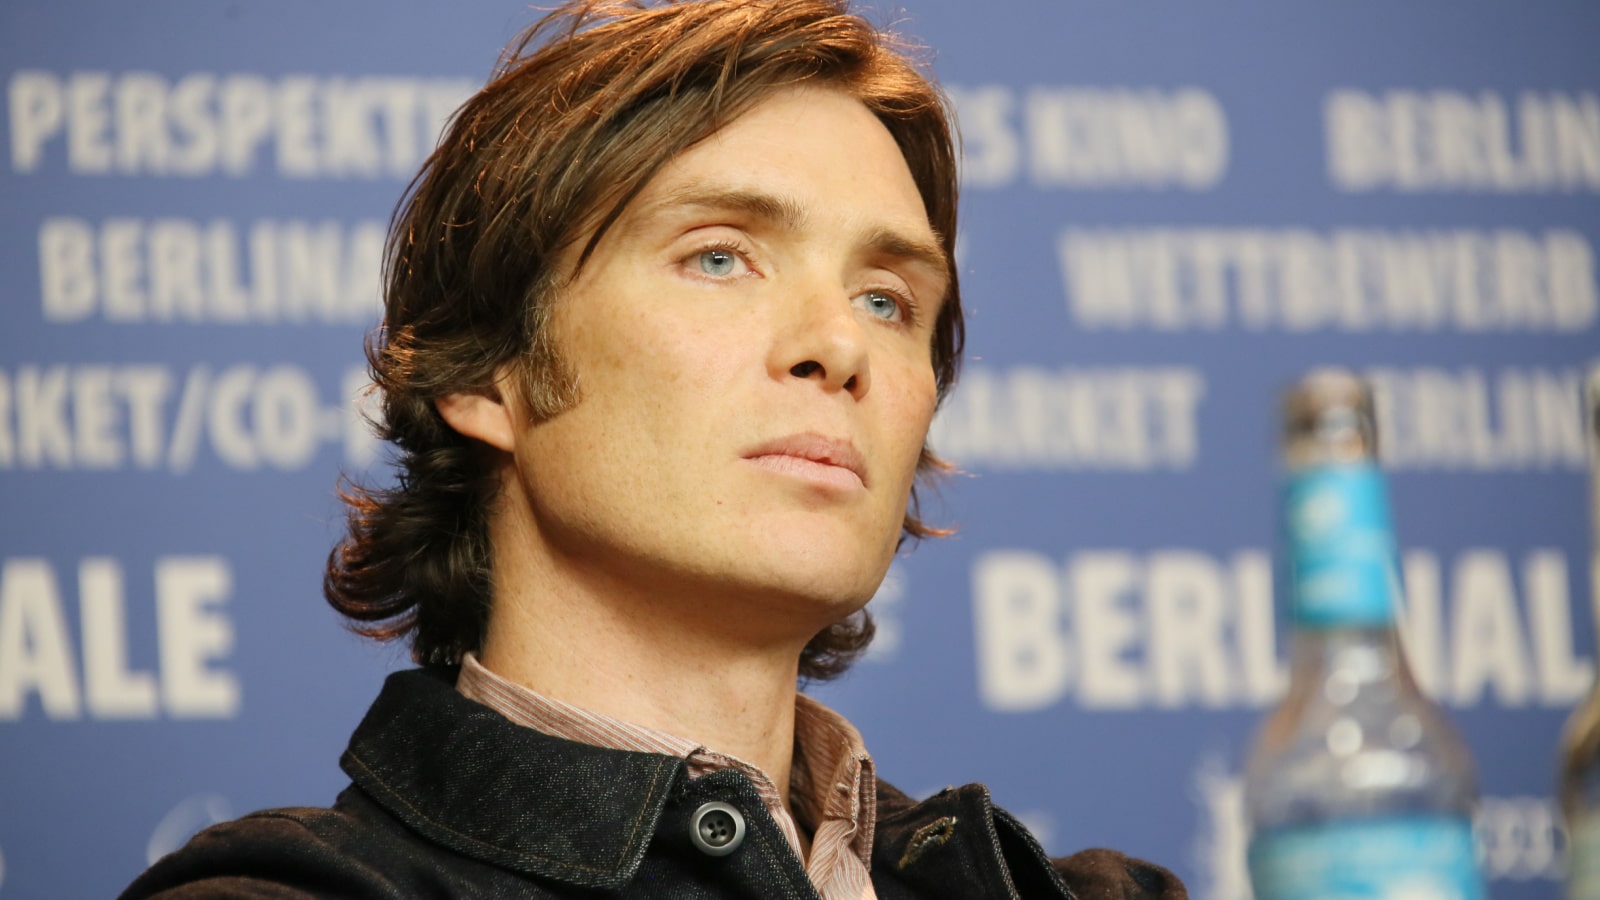 Cillian Murphy attends the 'The Party' press conference during the 67th Berlinale International Film Festival Berlin at Grand Hyatt Hotel on February 13, 2017 in Berlin, Germany